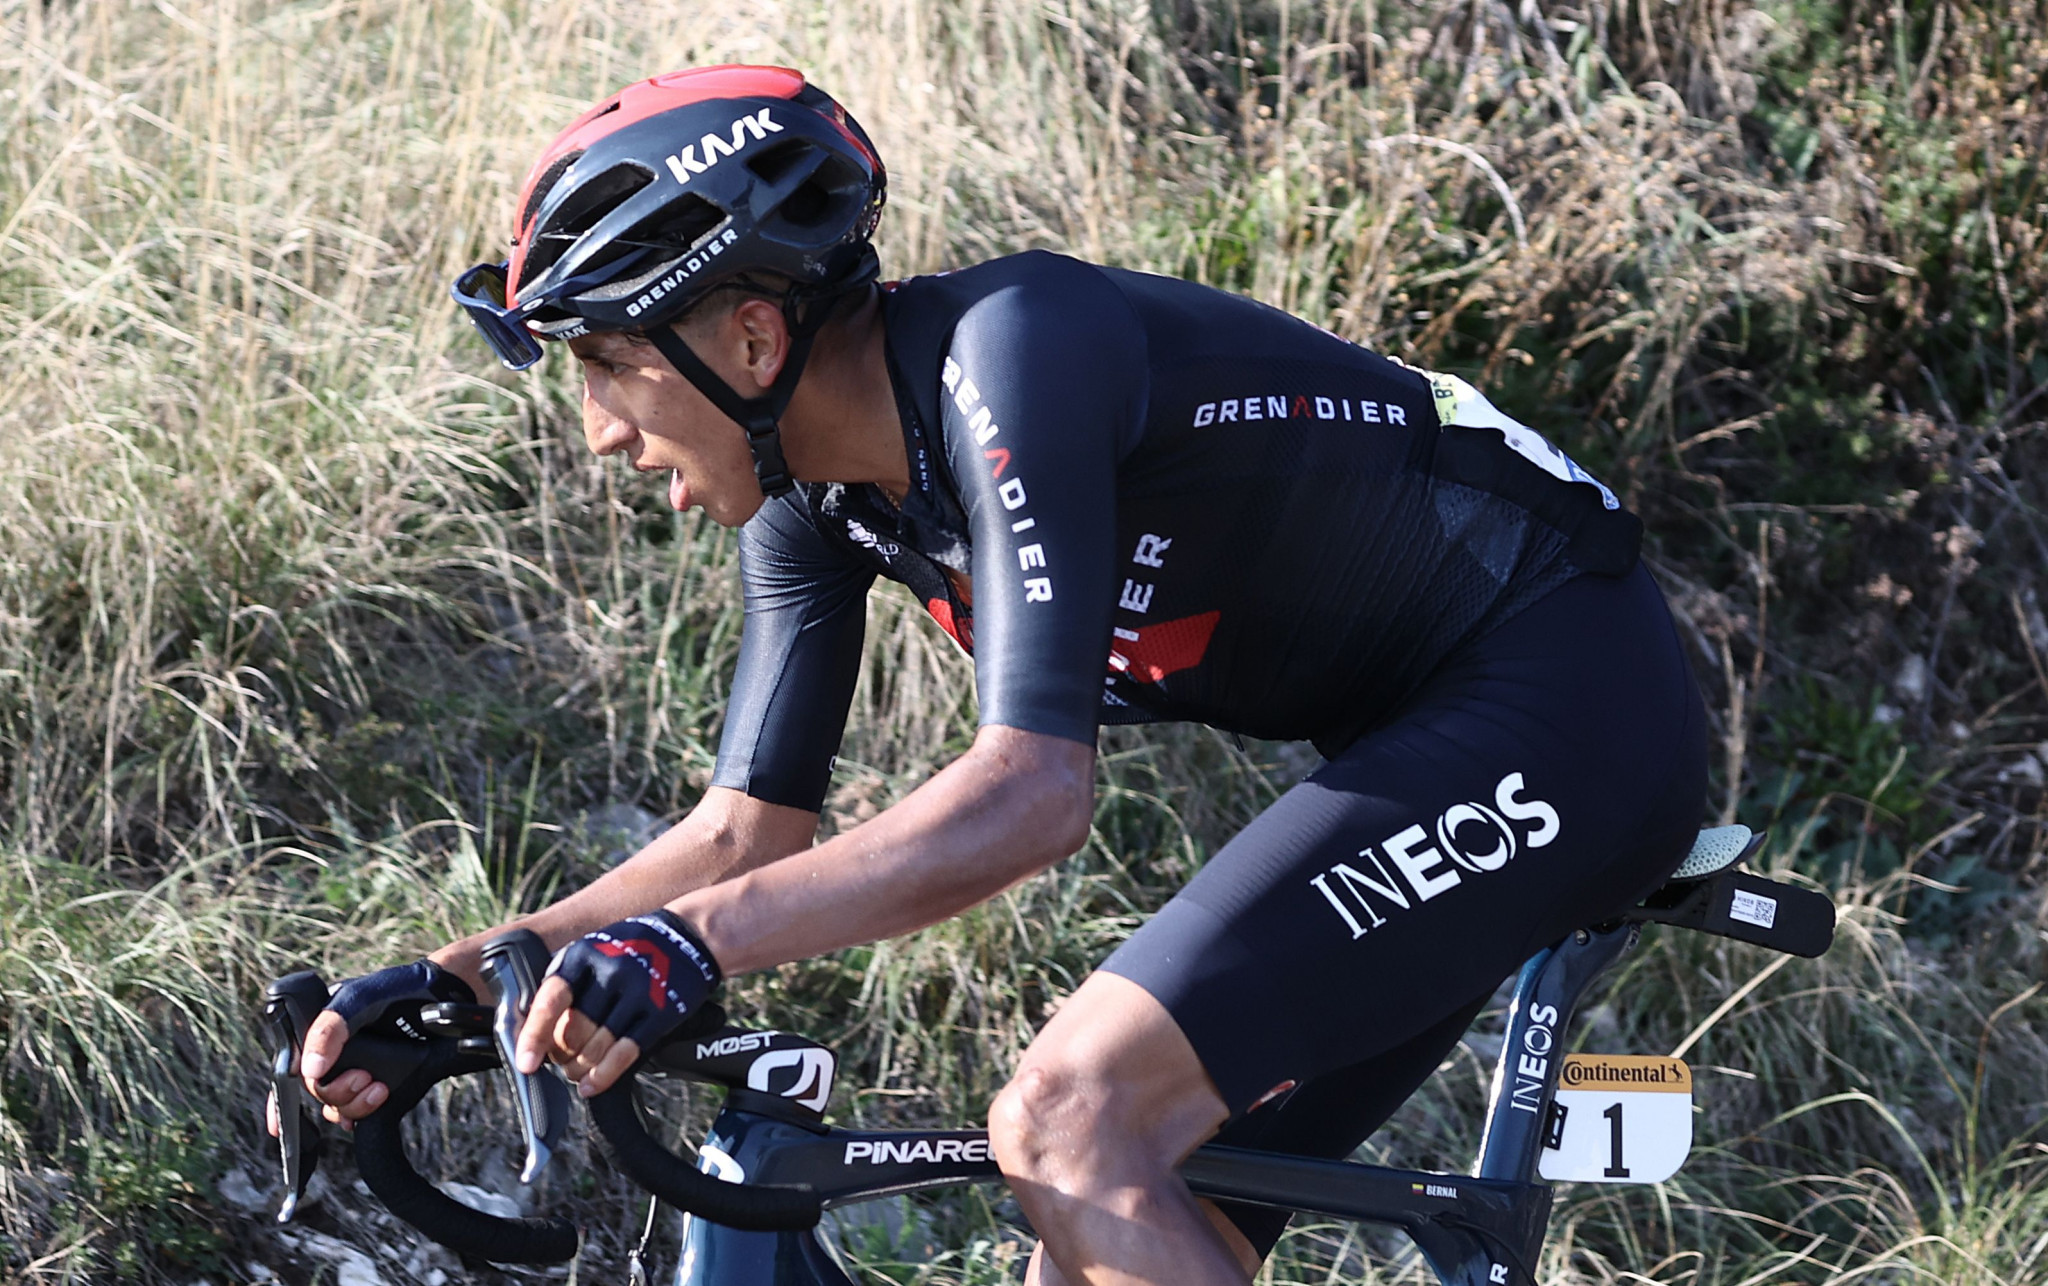 Defending champion Egan Bernal lost contact on the climb ©Getty Images